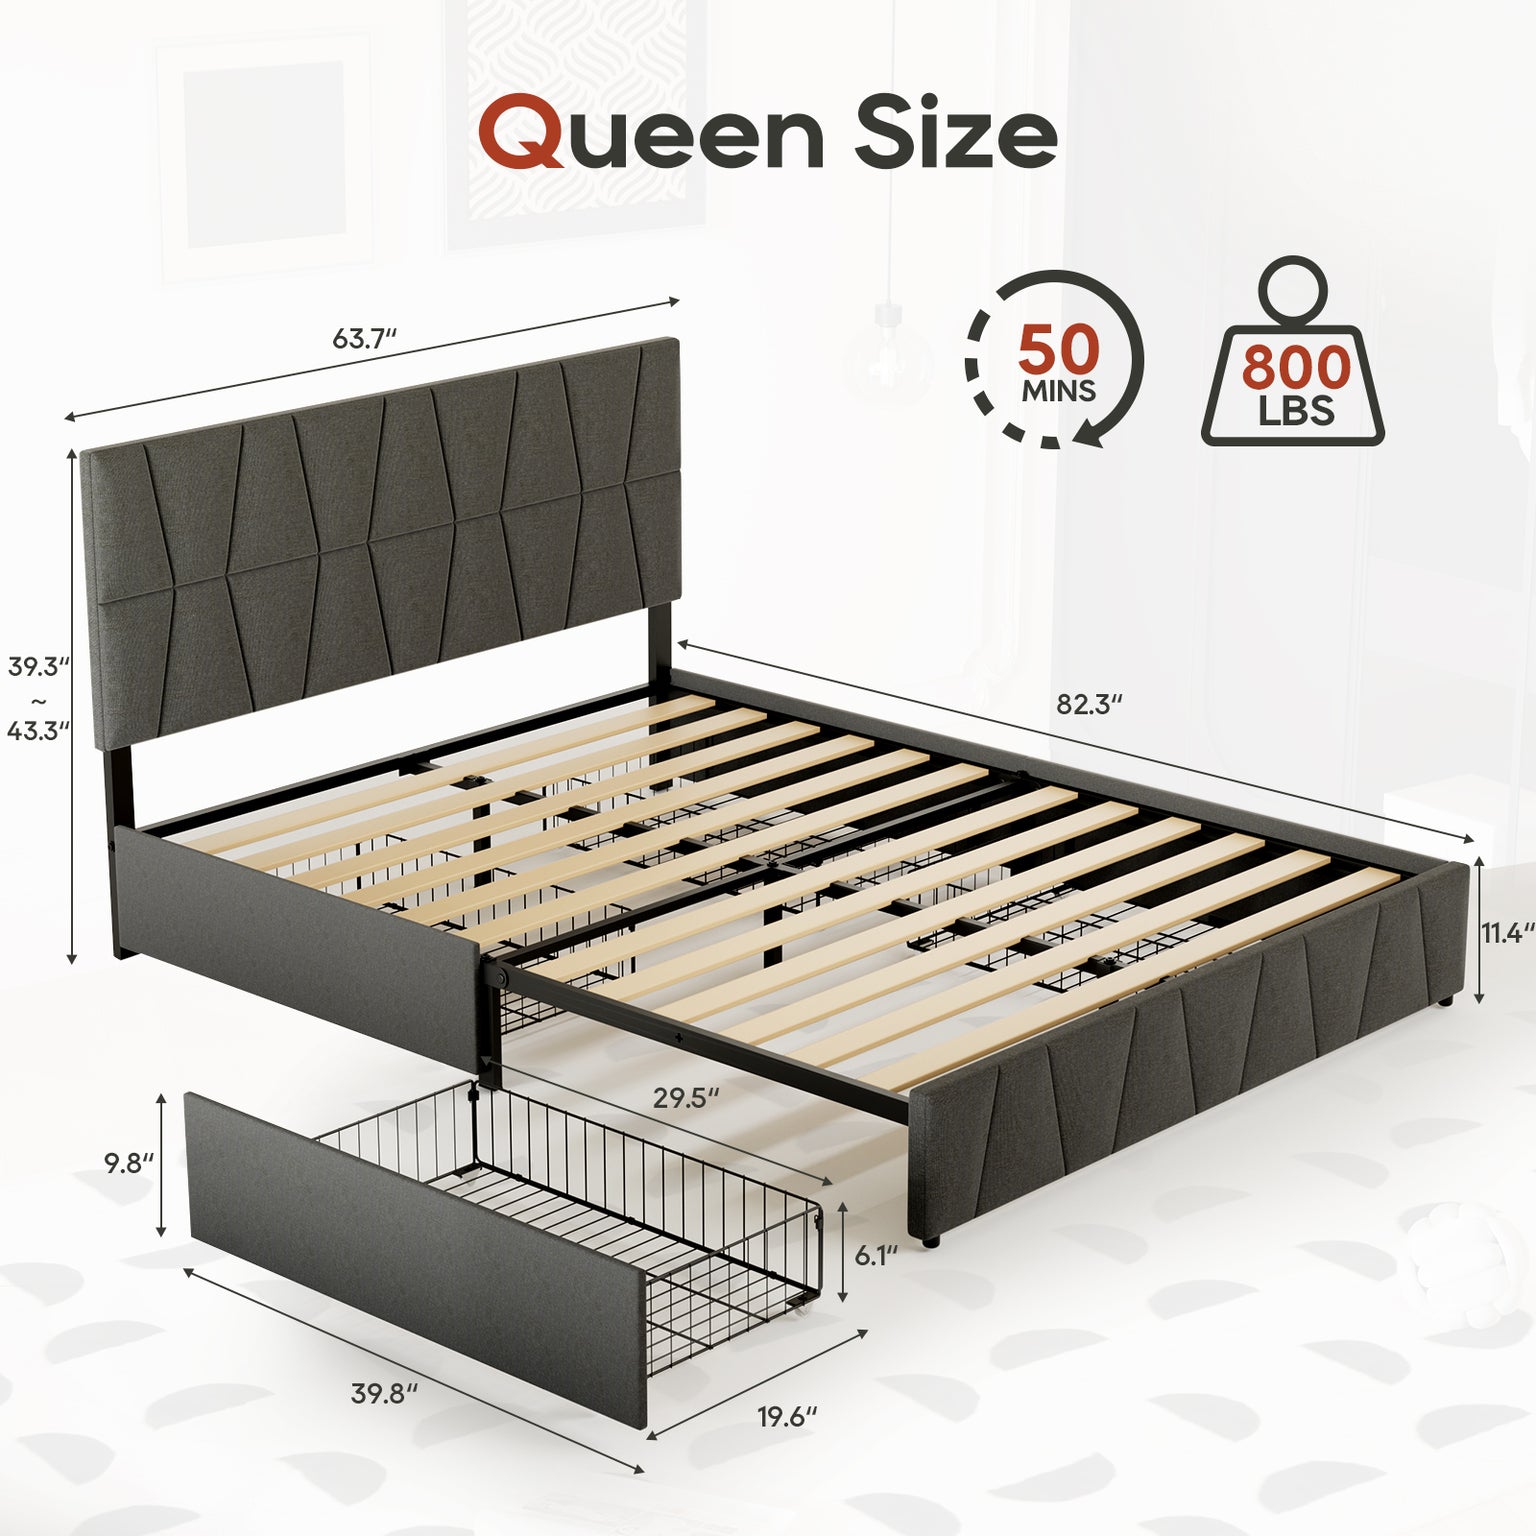 Upholstered Platform with Headboard and 4 Storage Drawers,Trapezoidal-Stitched Bed Base with Wooden Slates Support, No Box Spring Needed